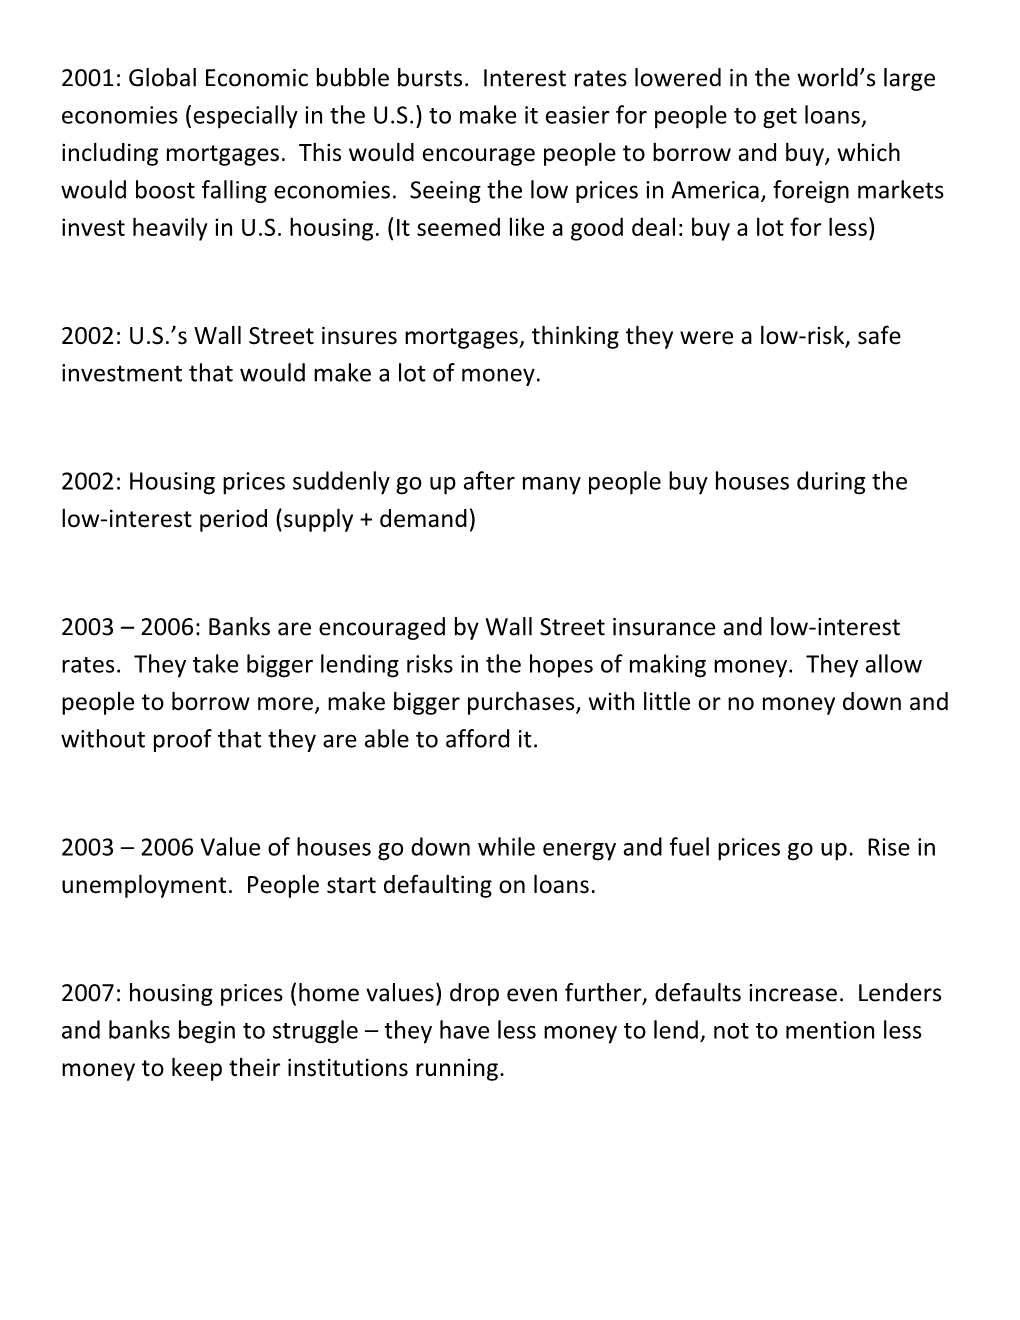 2002: U.S. S Wall Street Insures Mortgages, Thinking They Were a Low-Risk, Safe Investment